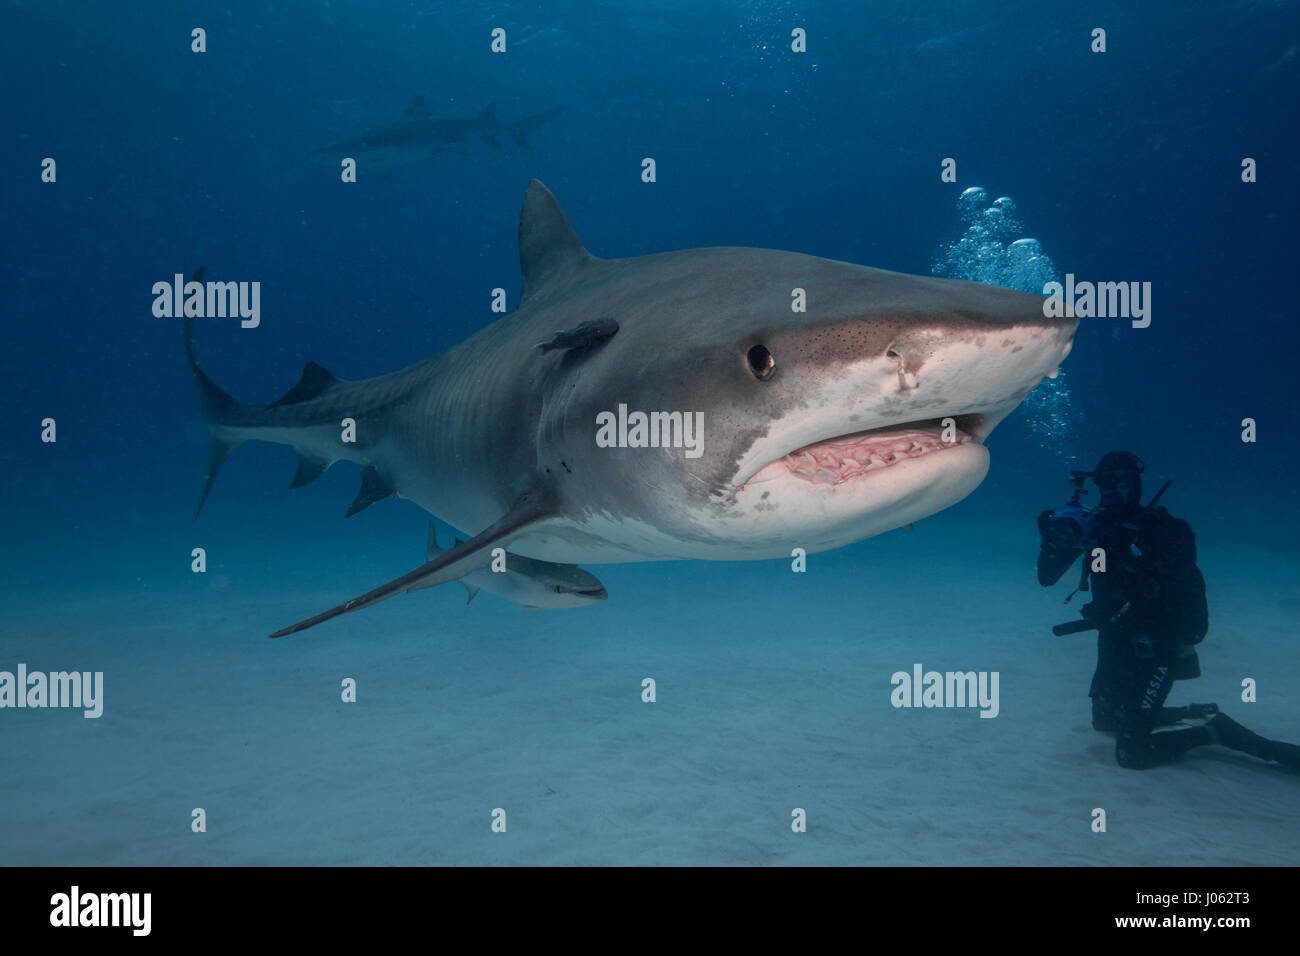 TIGER BEACH, GRAND BAHAMA: INCREDIBLE underwater images show the moment a group of divers came face-to-face with a 13-foot-long Tiger shark on the ocean floor. The spectacular sequence shows the divers reaching out and even petting the 1,000-pound predators as the inquisitive beasts happily pose for the camera. Other pictures show the sharks appearing to swim with the divers as they move towards the water’s surface. The stunning photographs were taken at Tiger Beach, Grand Bahama by photographer, Steve Hinczynski (49) from Venice, Florida, USA. To take his images Steve used a Canon 7D Mark II  Stock Photo